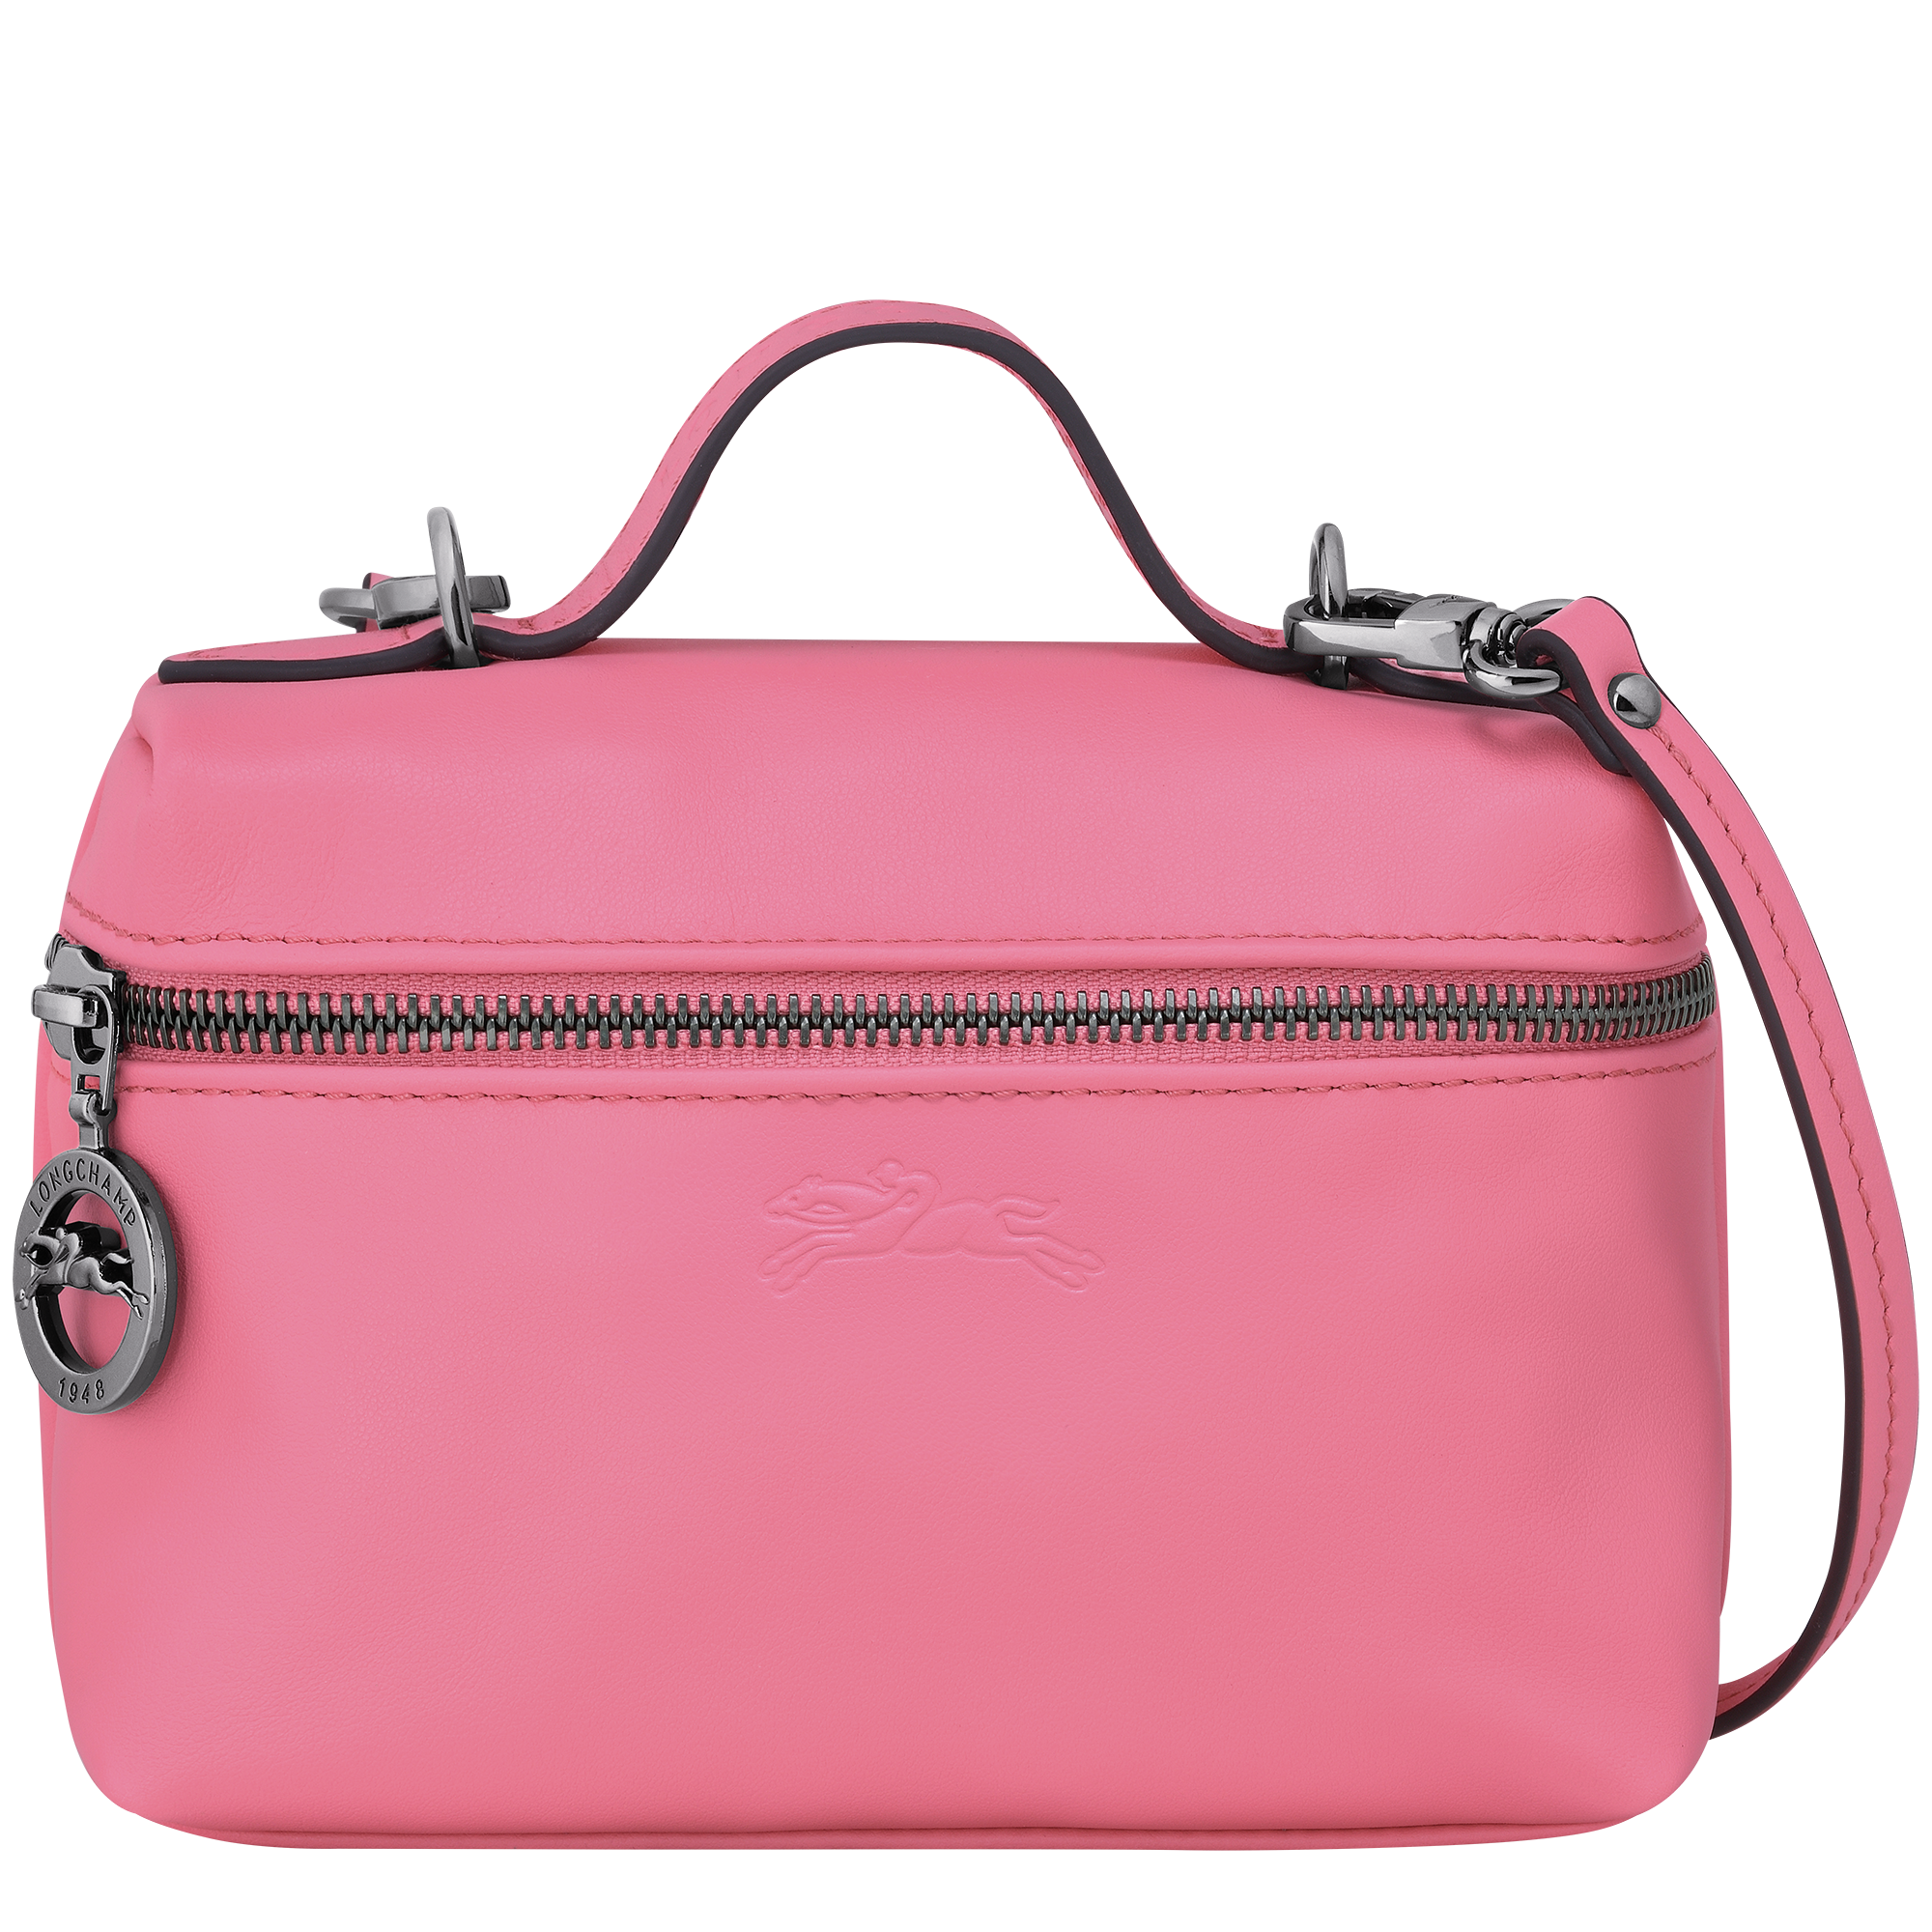 Le Pliage Xtra XS Vanity Pink - Leather (10187987018)